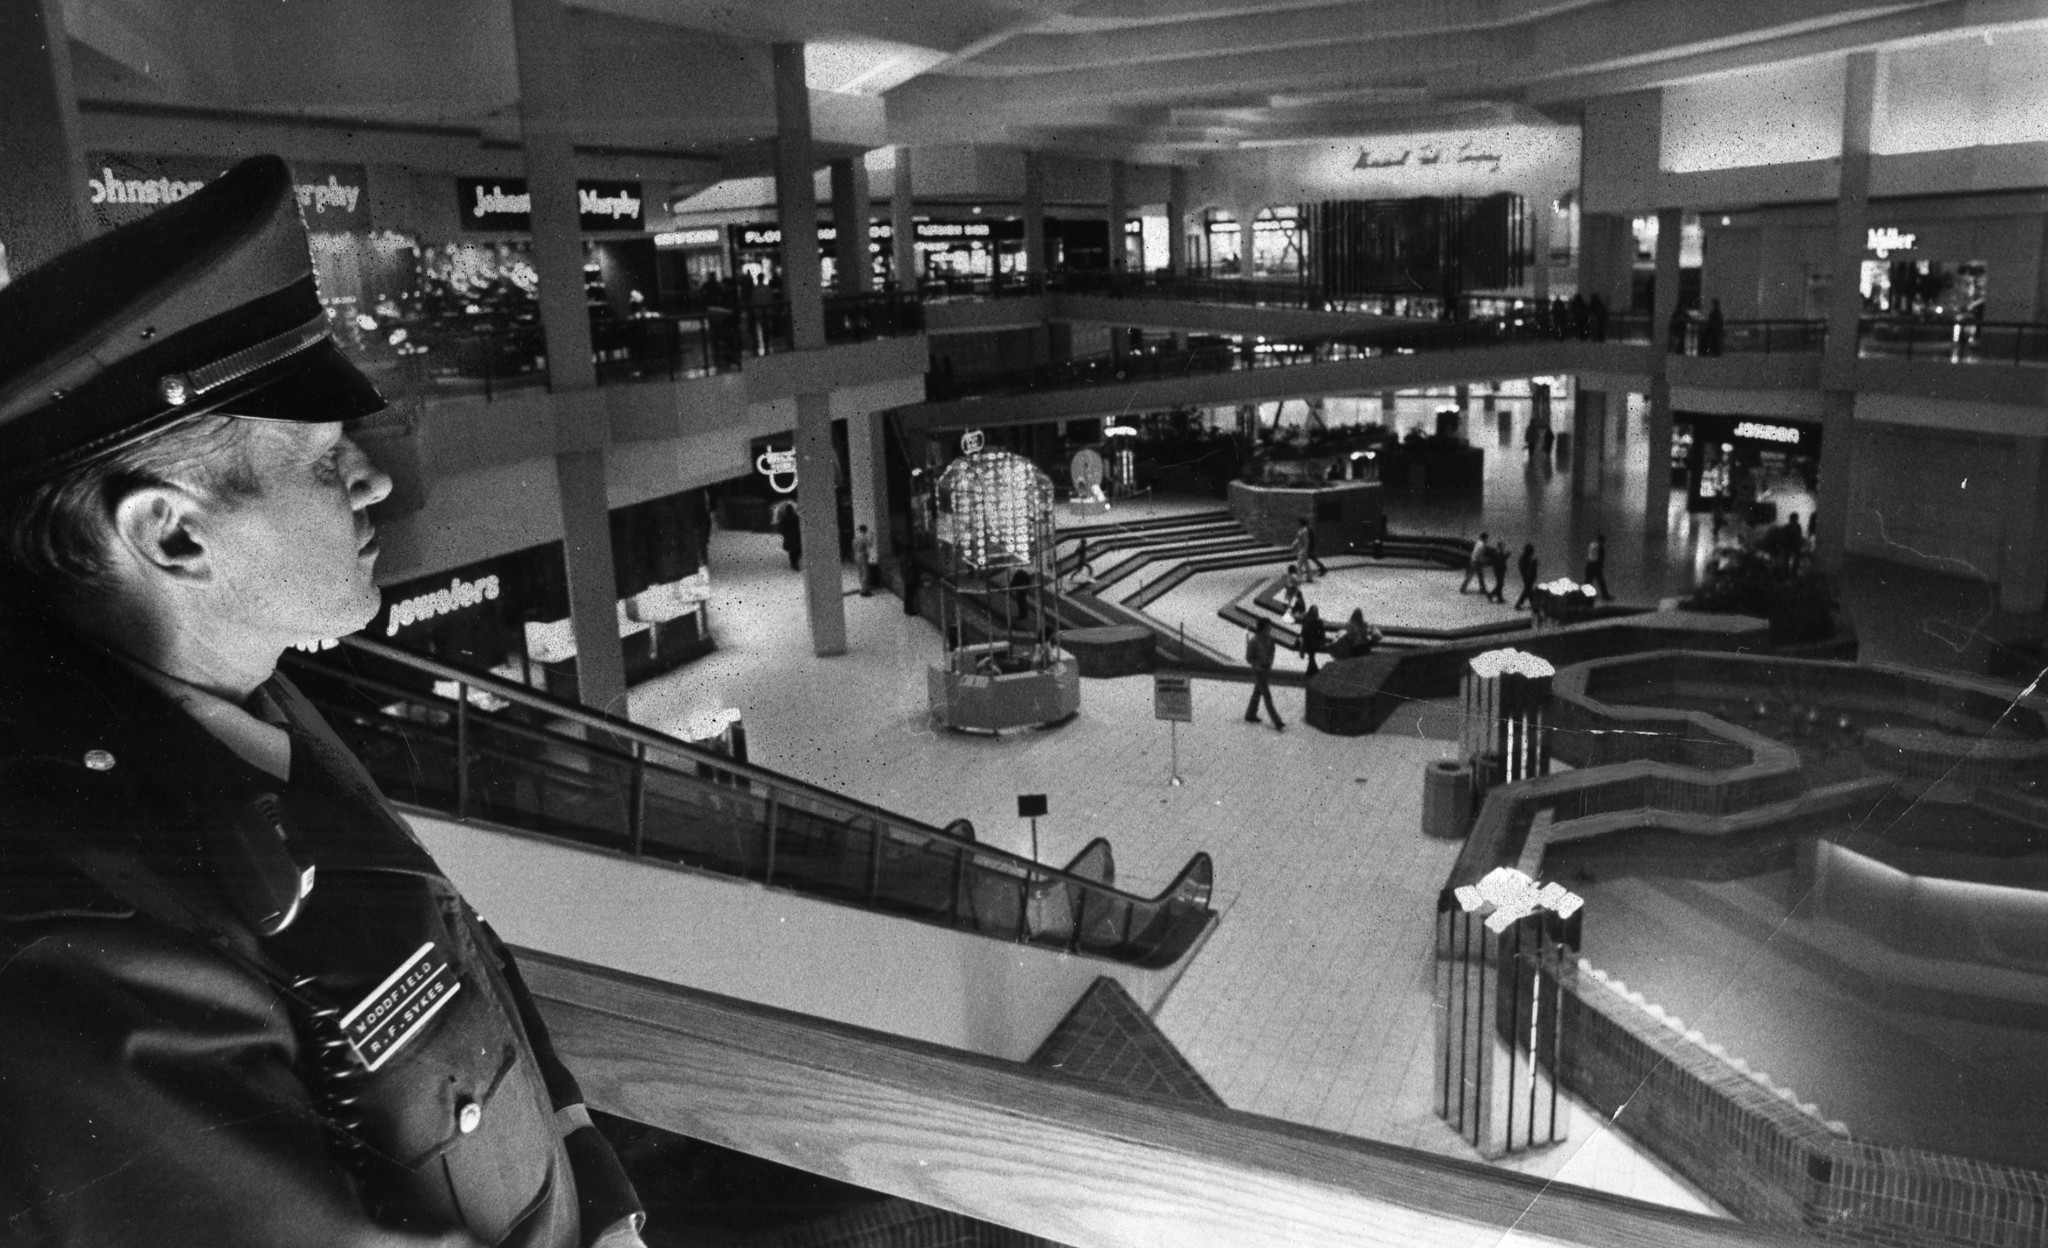 Remember Marshall Field's in the Old Orchard shopping center in